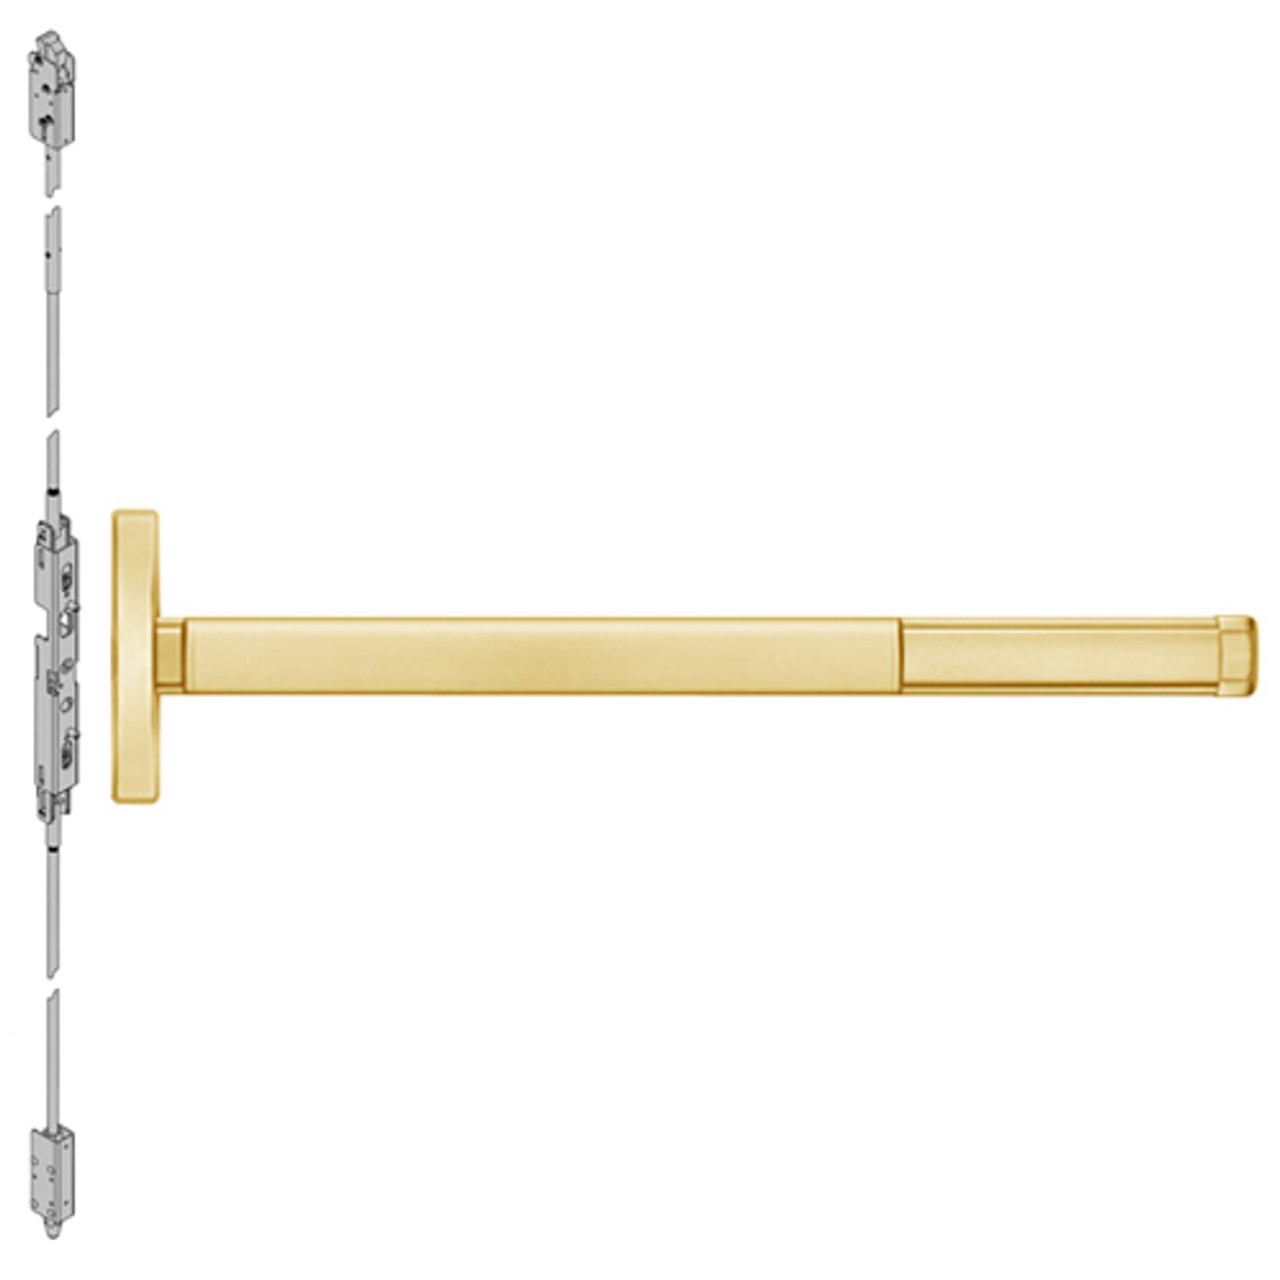 DEFL2602-605-36 PHI 2600 Series Fire Rated Concealed Vertical Rod Exit Device with Delayed Egress Prepped for Dummy Trim in Bright Brass Finish